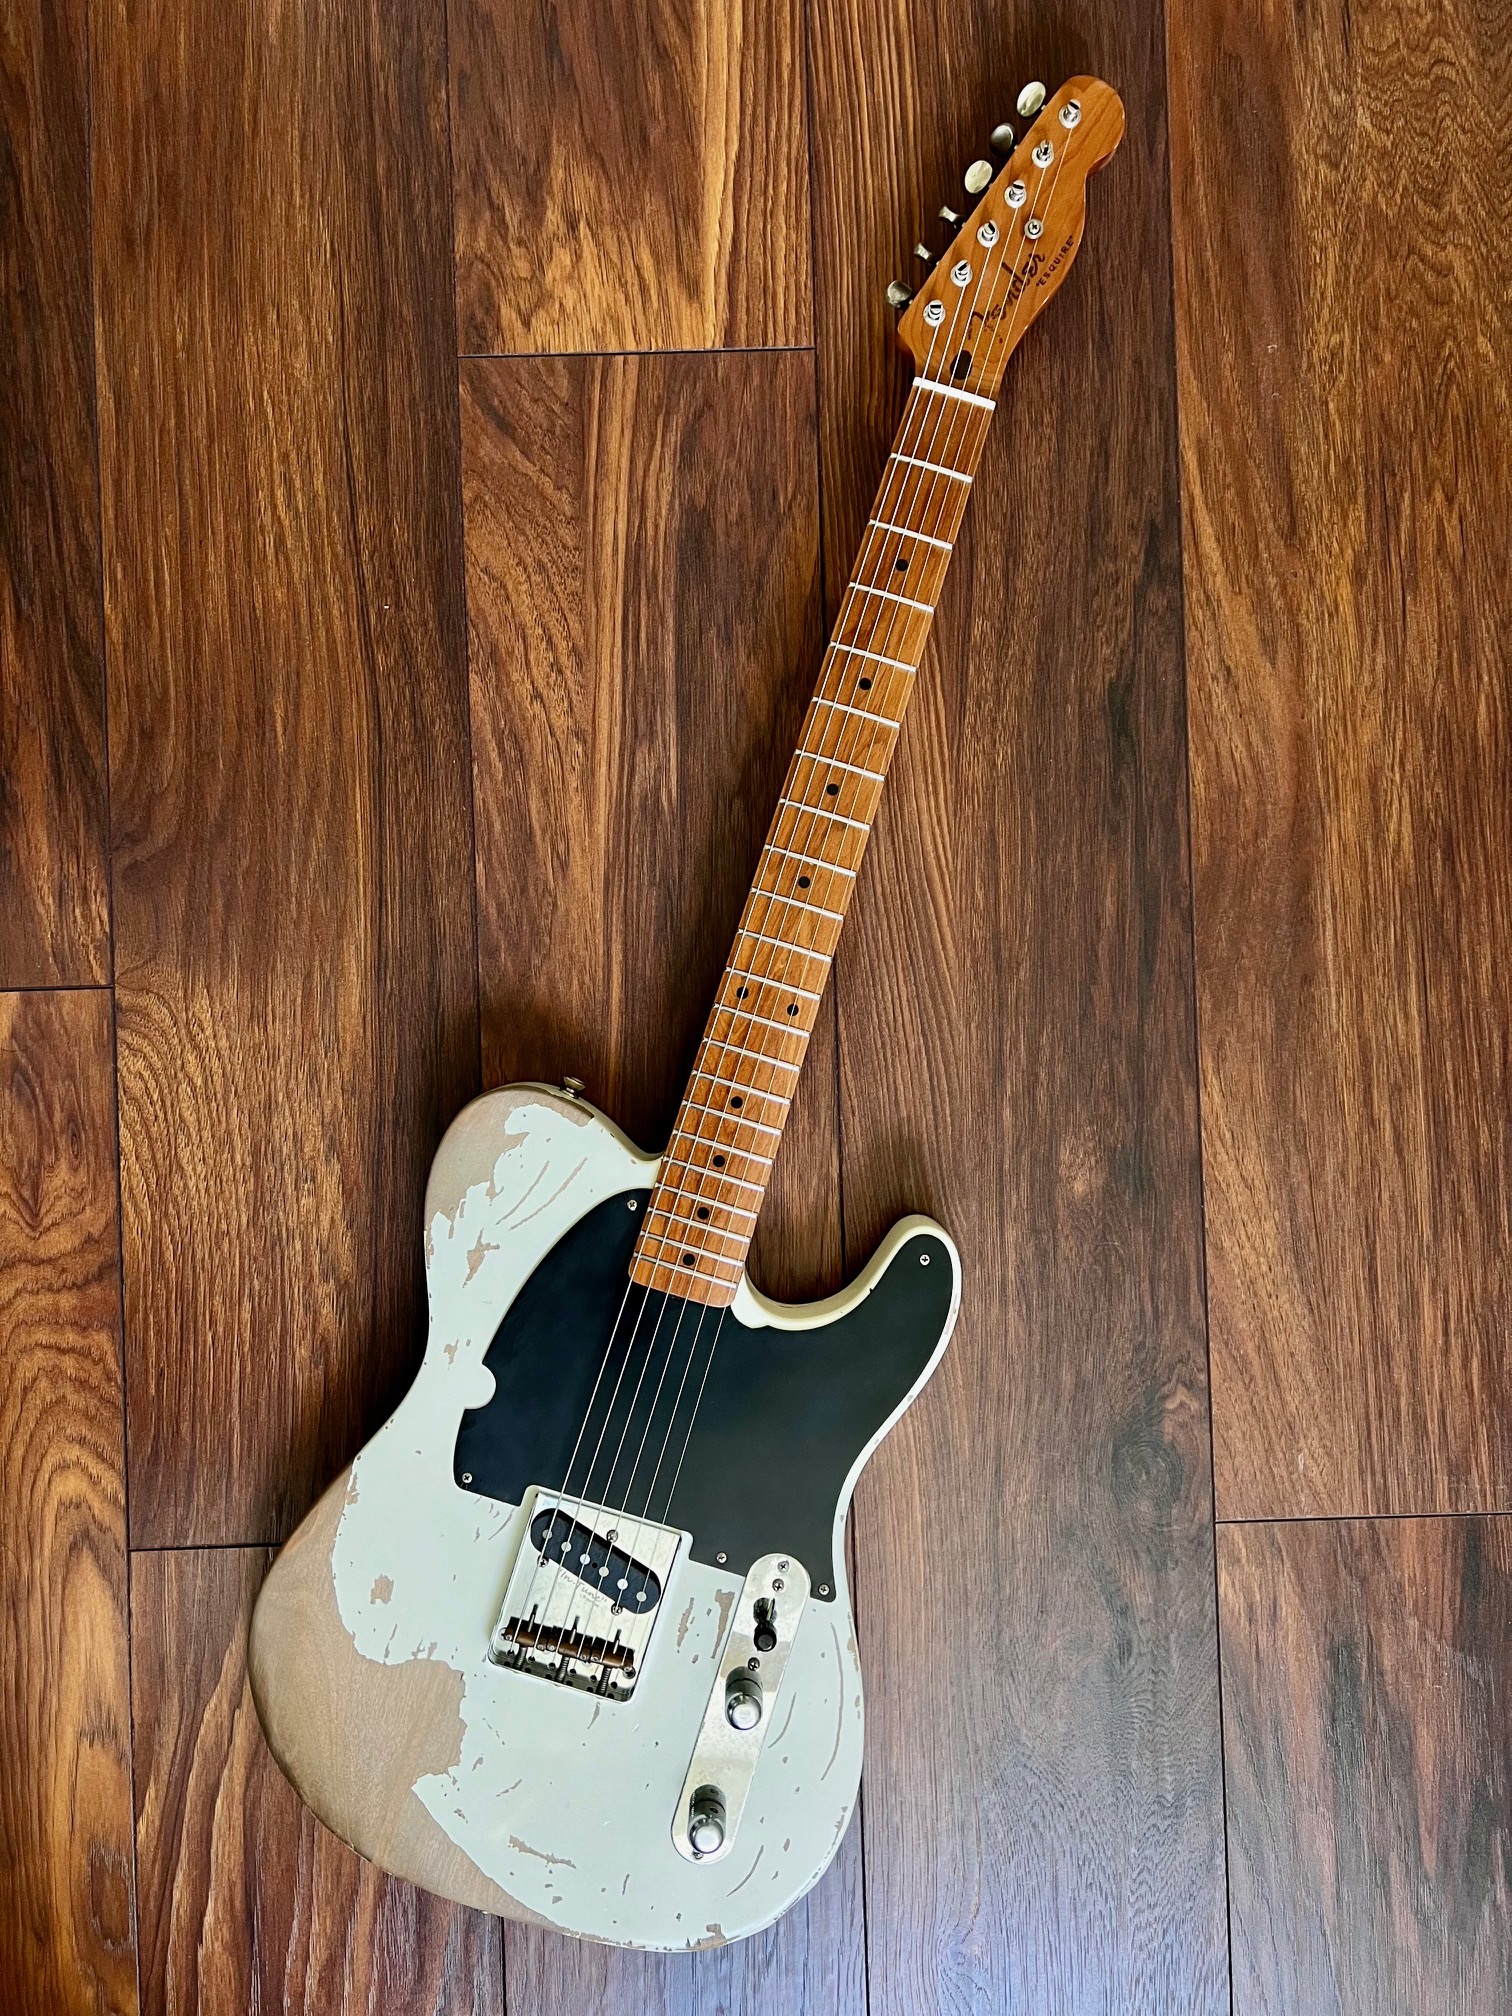 Luke's Jeff Beck Esquire build - Featuring a lightly reliced GA roasted maple & rosewood vintage tele neck - A stunning build!